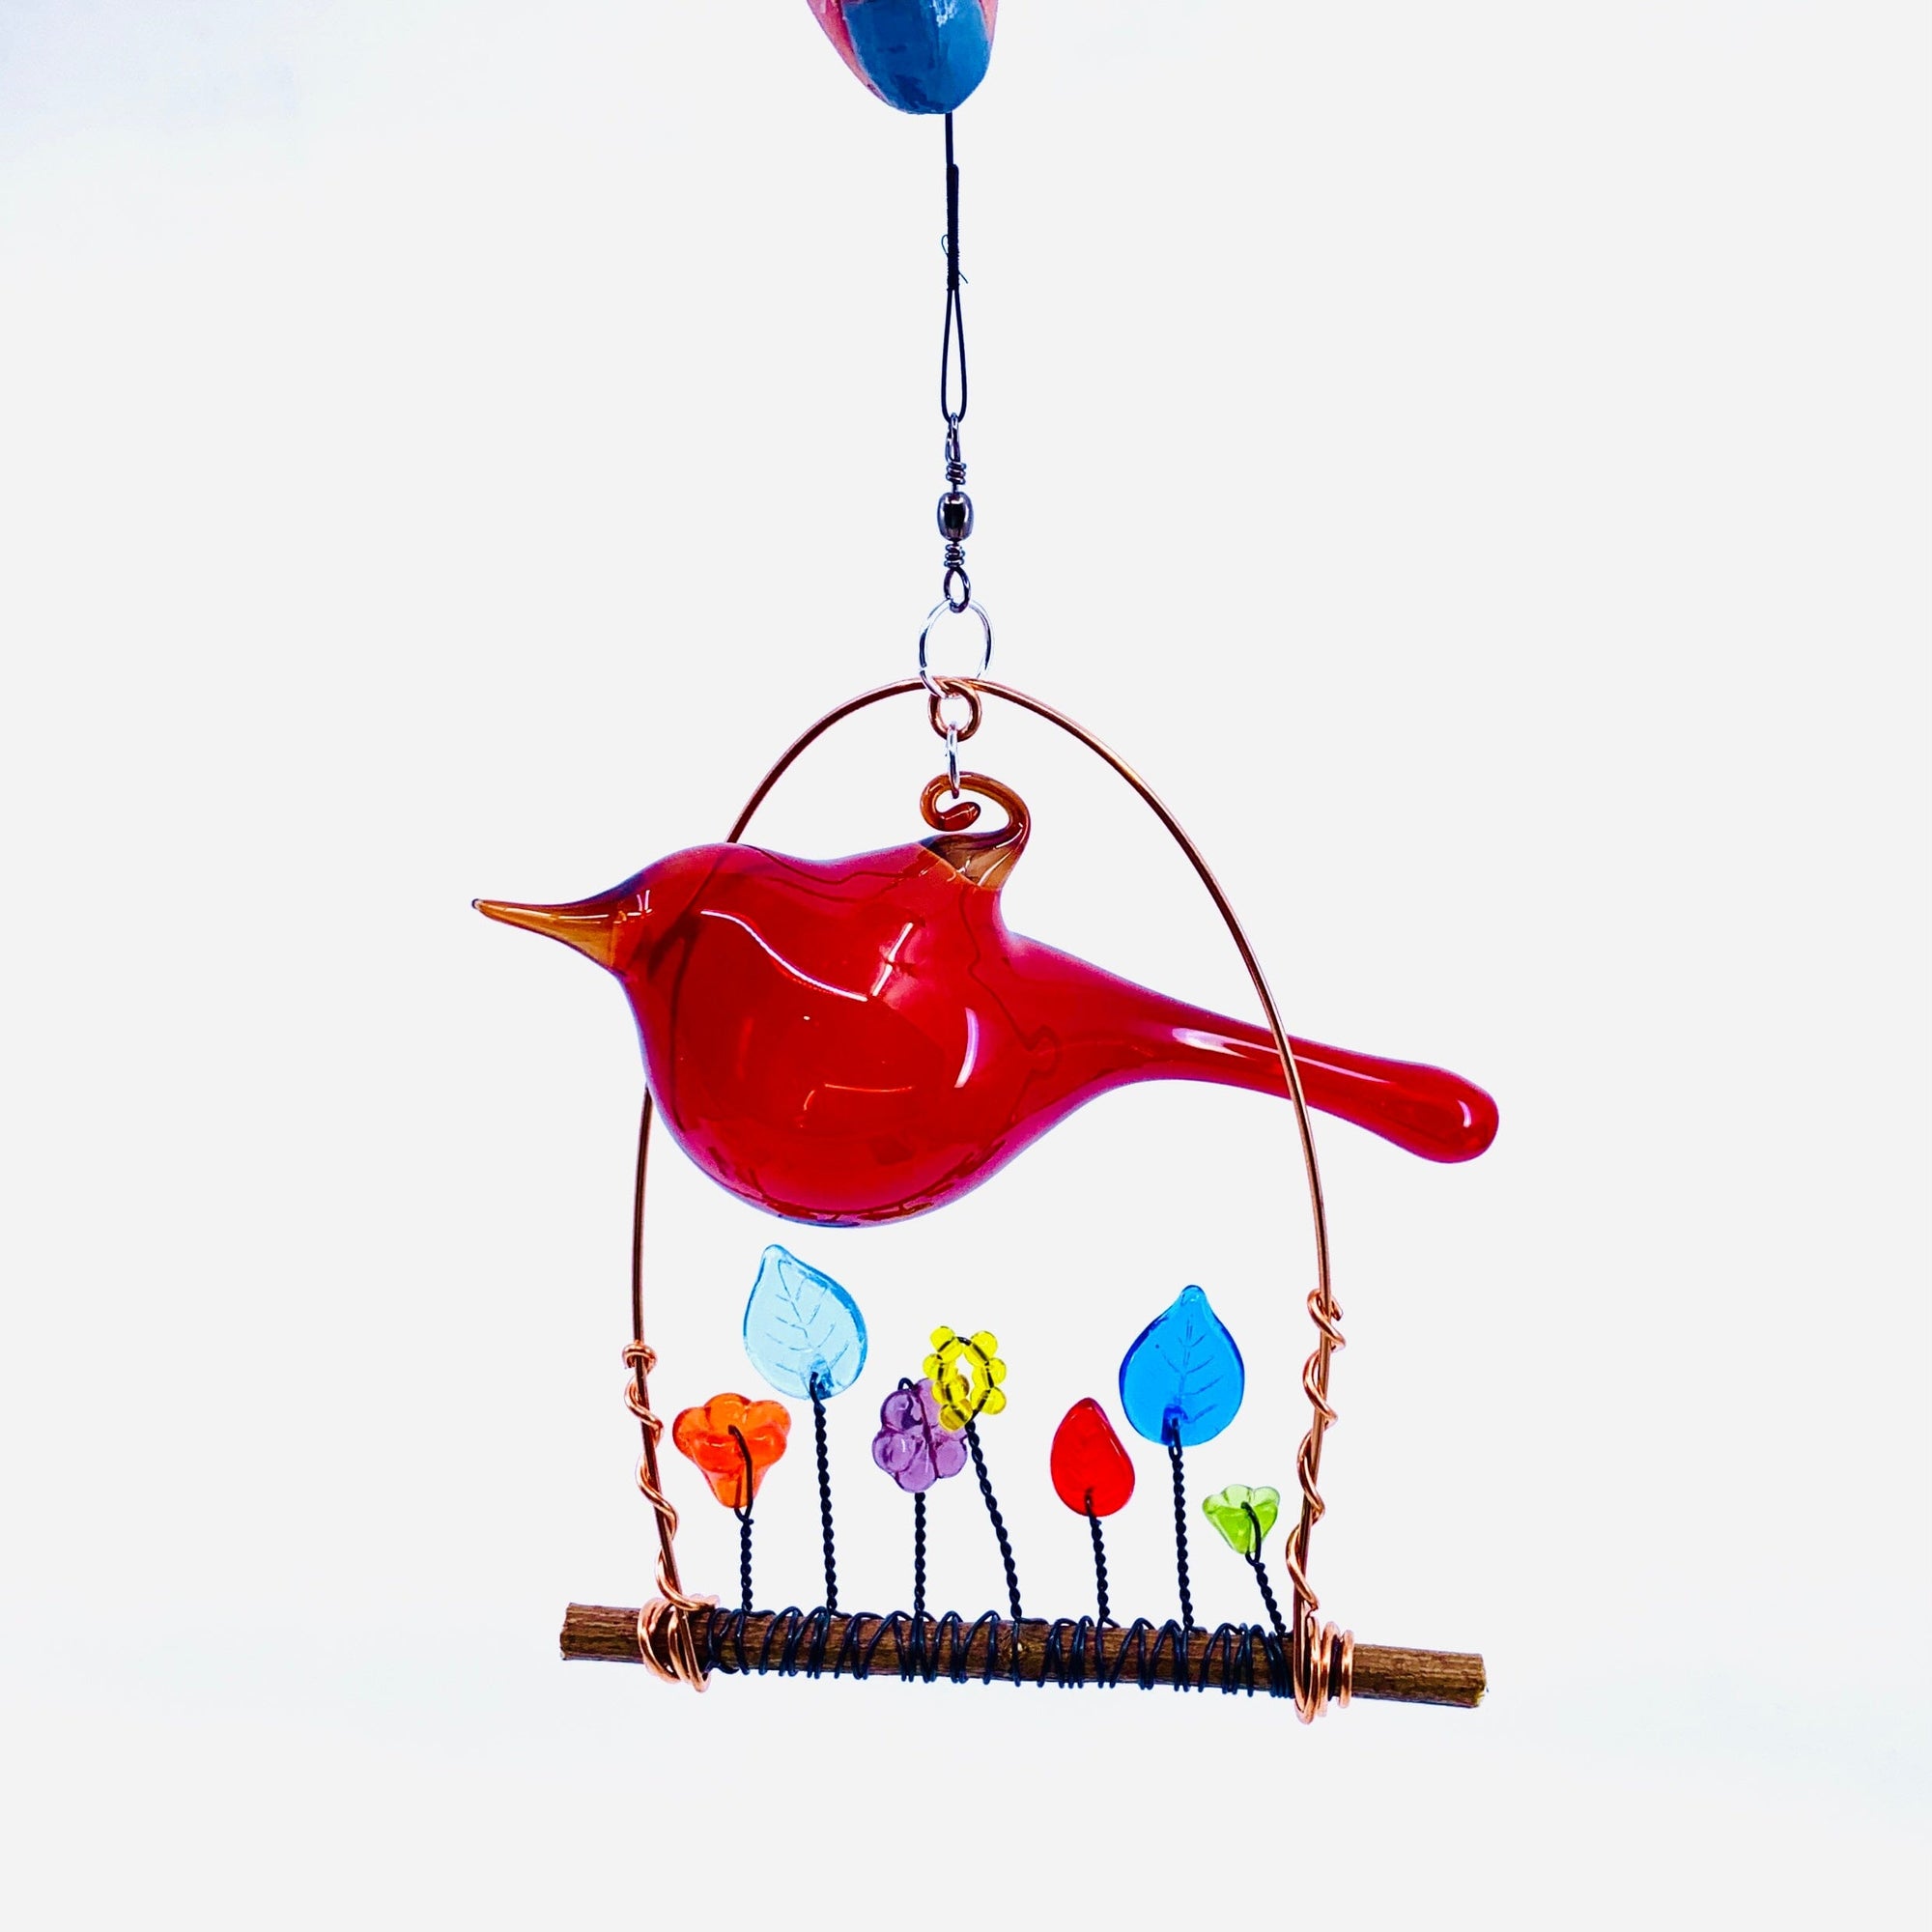 Hand Blown Glass Bird Wired Flower Garden Swing 1, Red Decor Whimsical Wire and Glass 